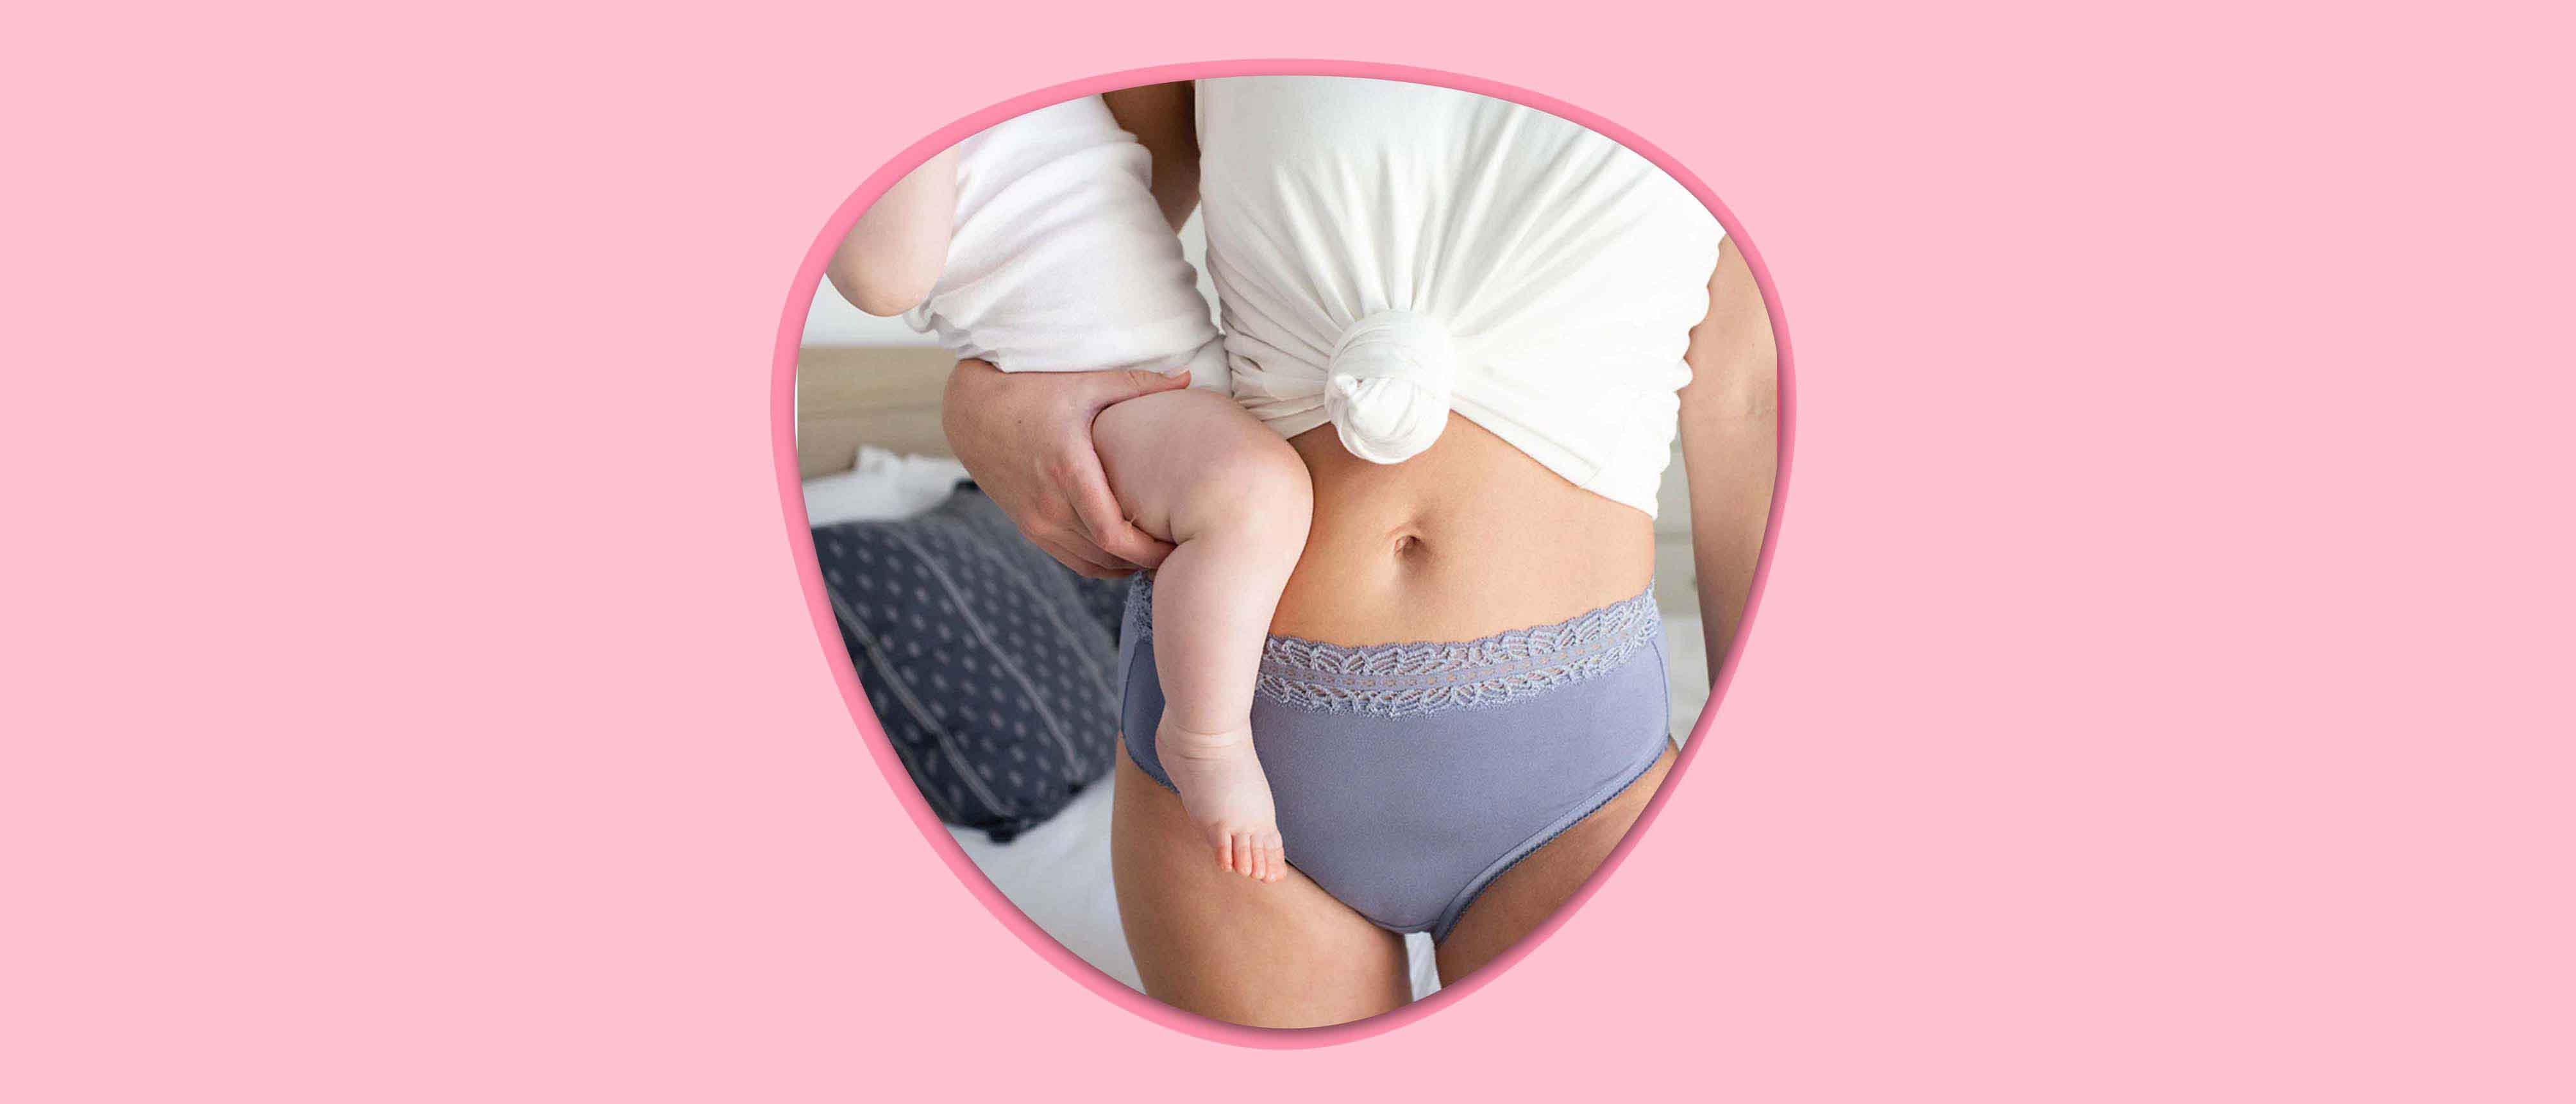 Image of mom in underwear holding a baby